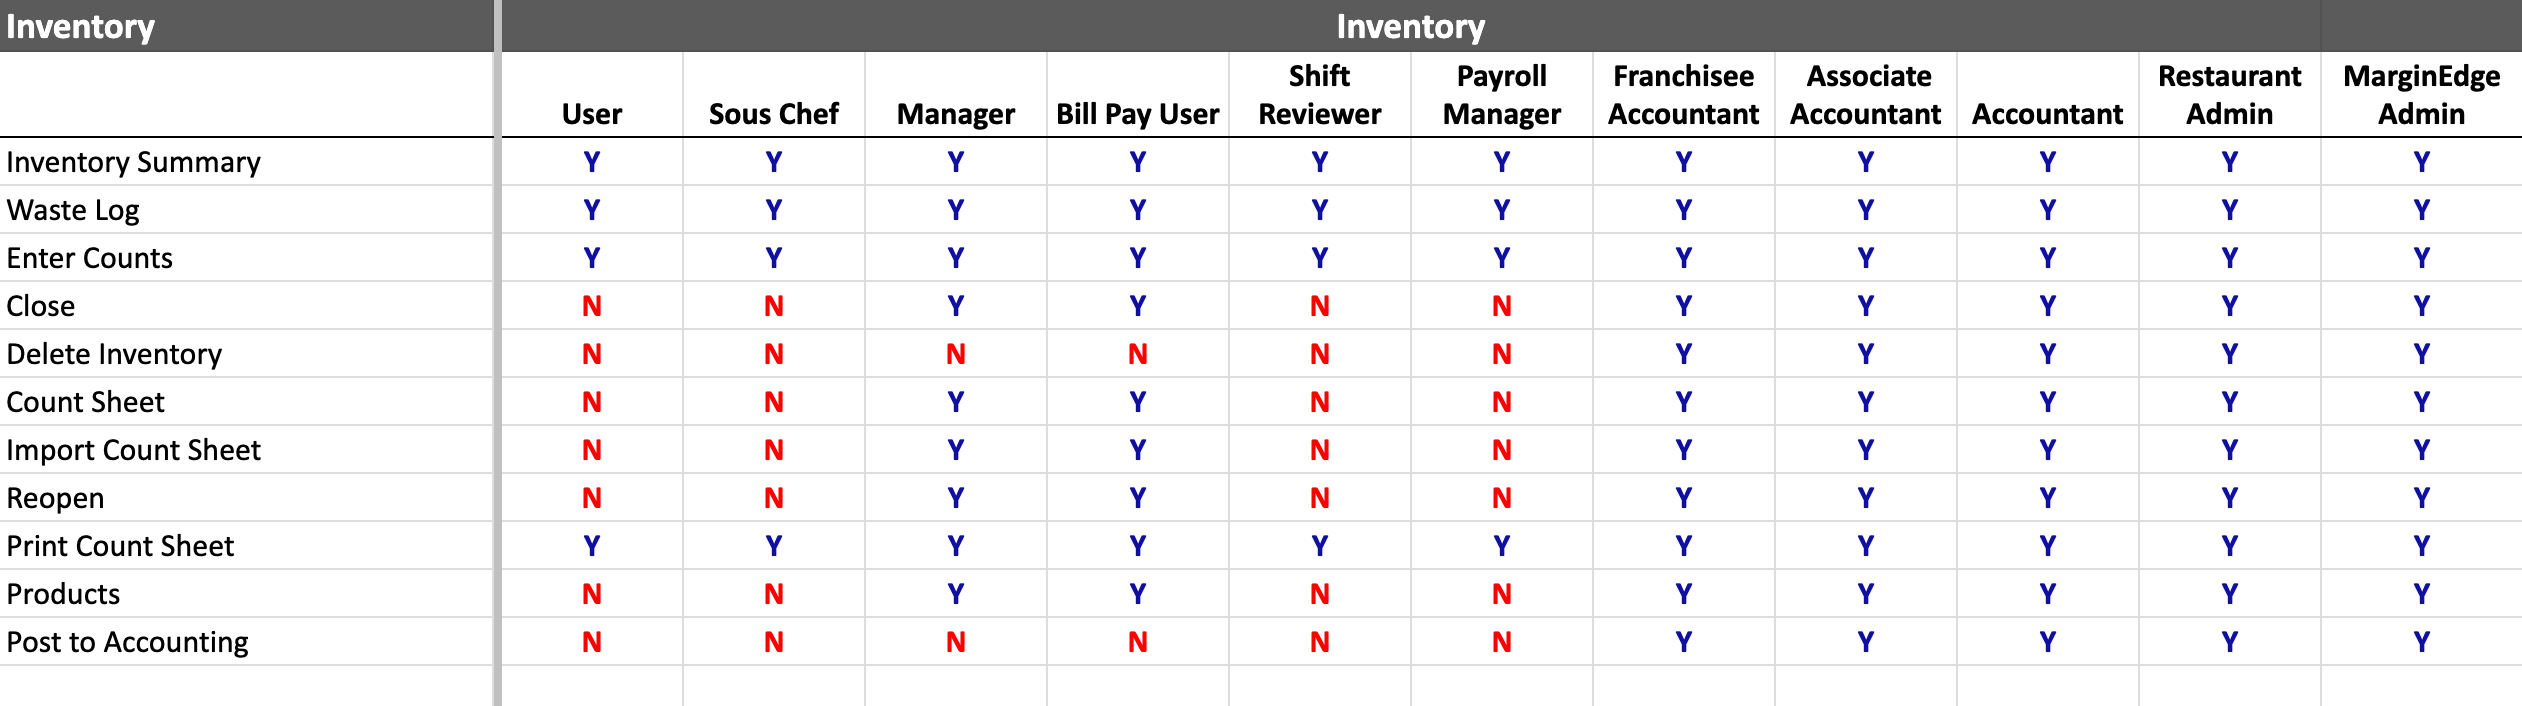 URoles-Inventory.png